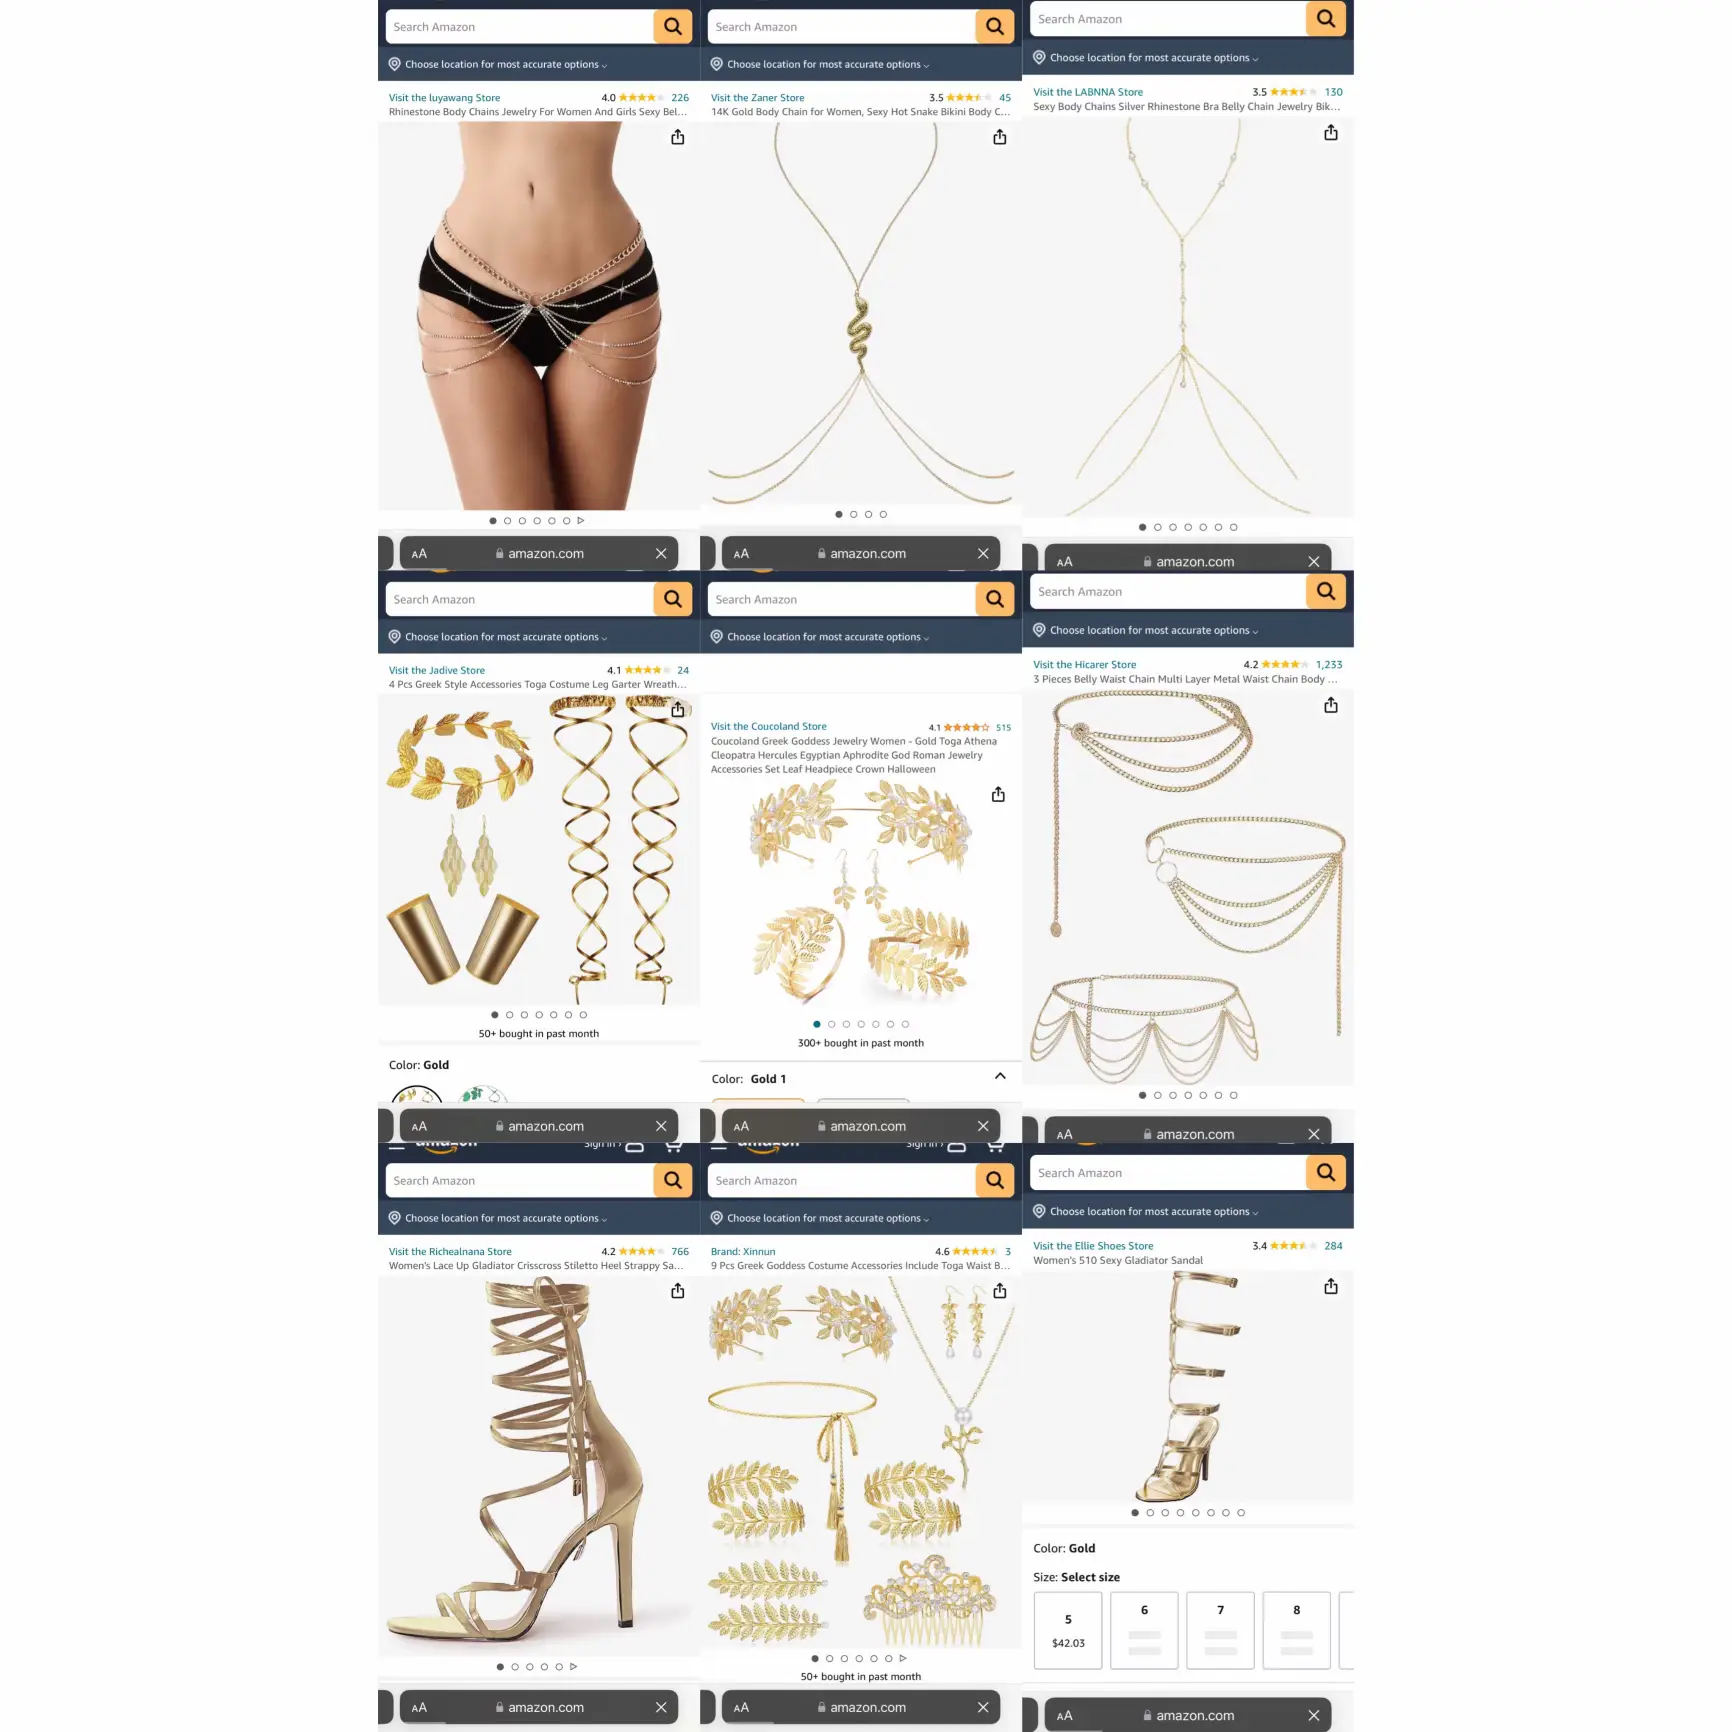 TEMPTRESS Gold & Rhinestone Body Chains / Body Jewelry for Lingerie Ra